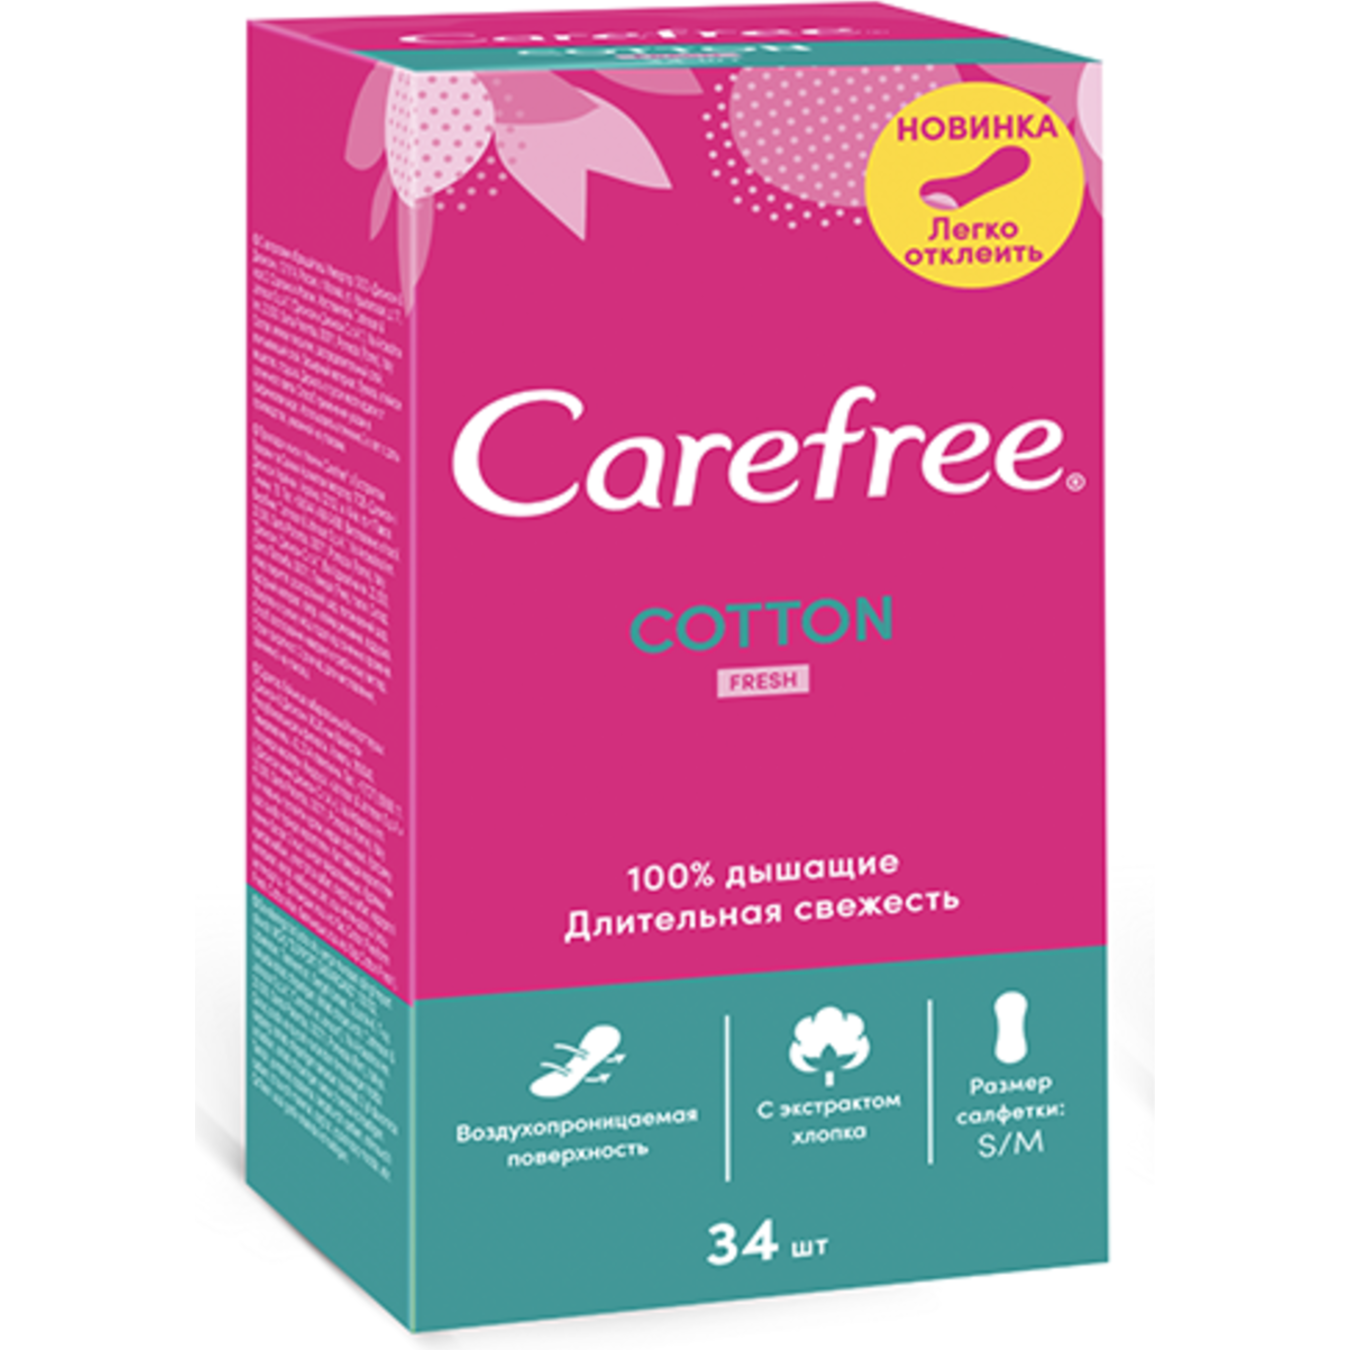 Carefree Cotton Extract Fresh Women's Hygiene Panty Liners 34pcs